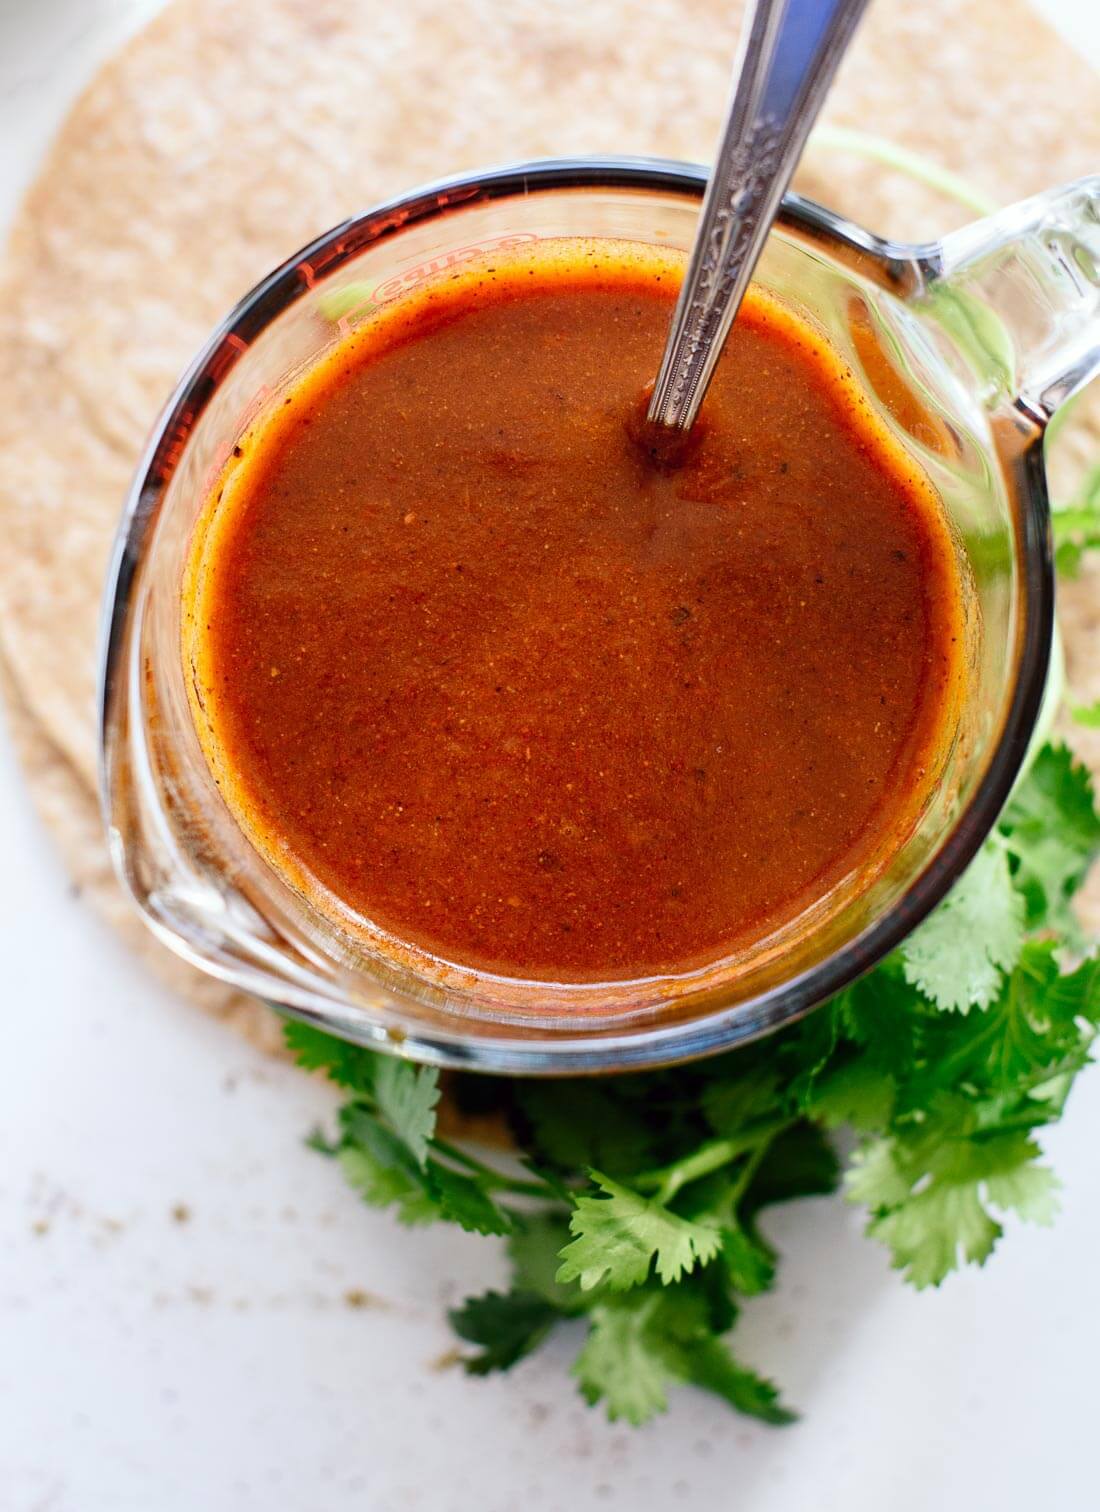 Homemade enchilada sauce is so easy to make! This sauce tastes so good, you'll never go back to the store-bought kind. Perfect for your other Mexican recipes, too! cookieandkate.com